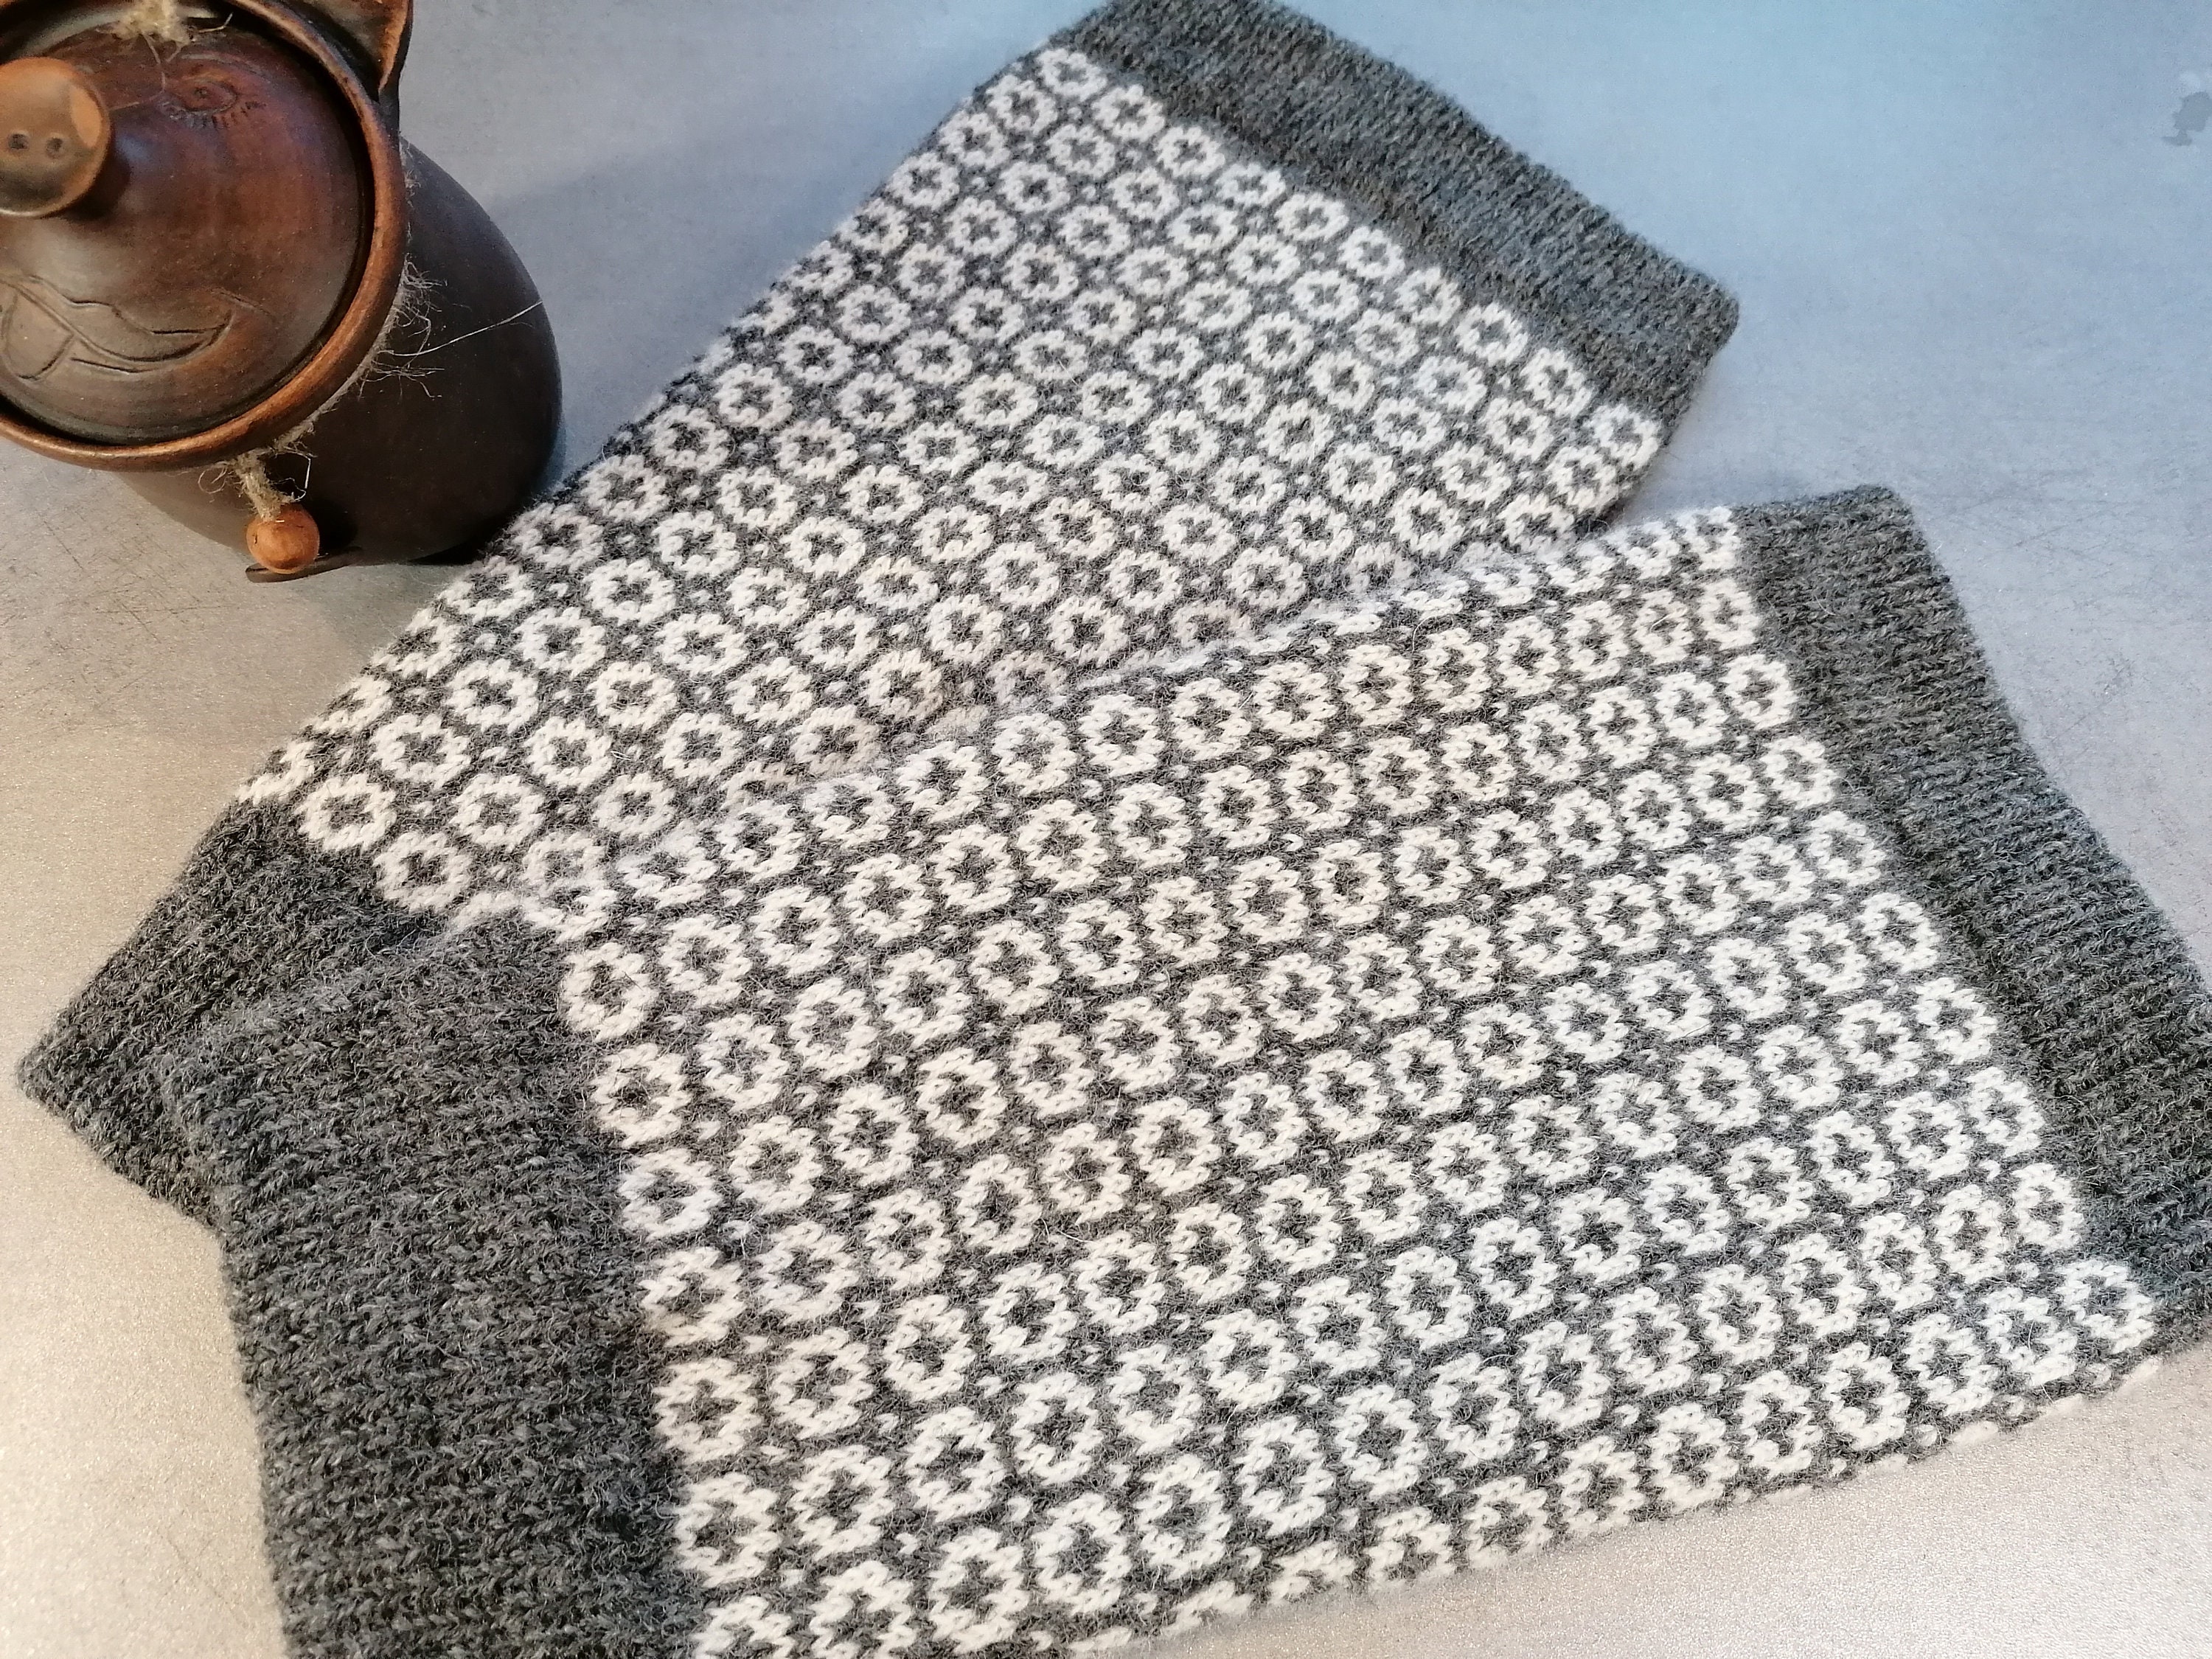 Fair Isle Leg Warmers, Wide Calf Model, Finely Knitted Nordic Star Pattern  Grey and White Combination 